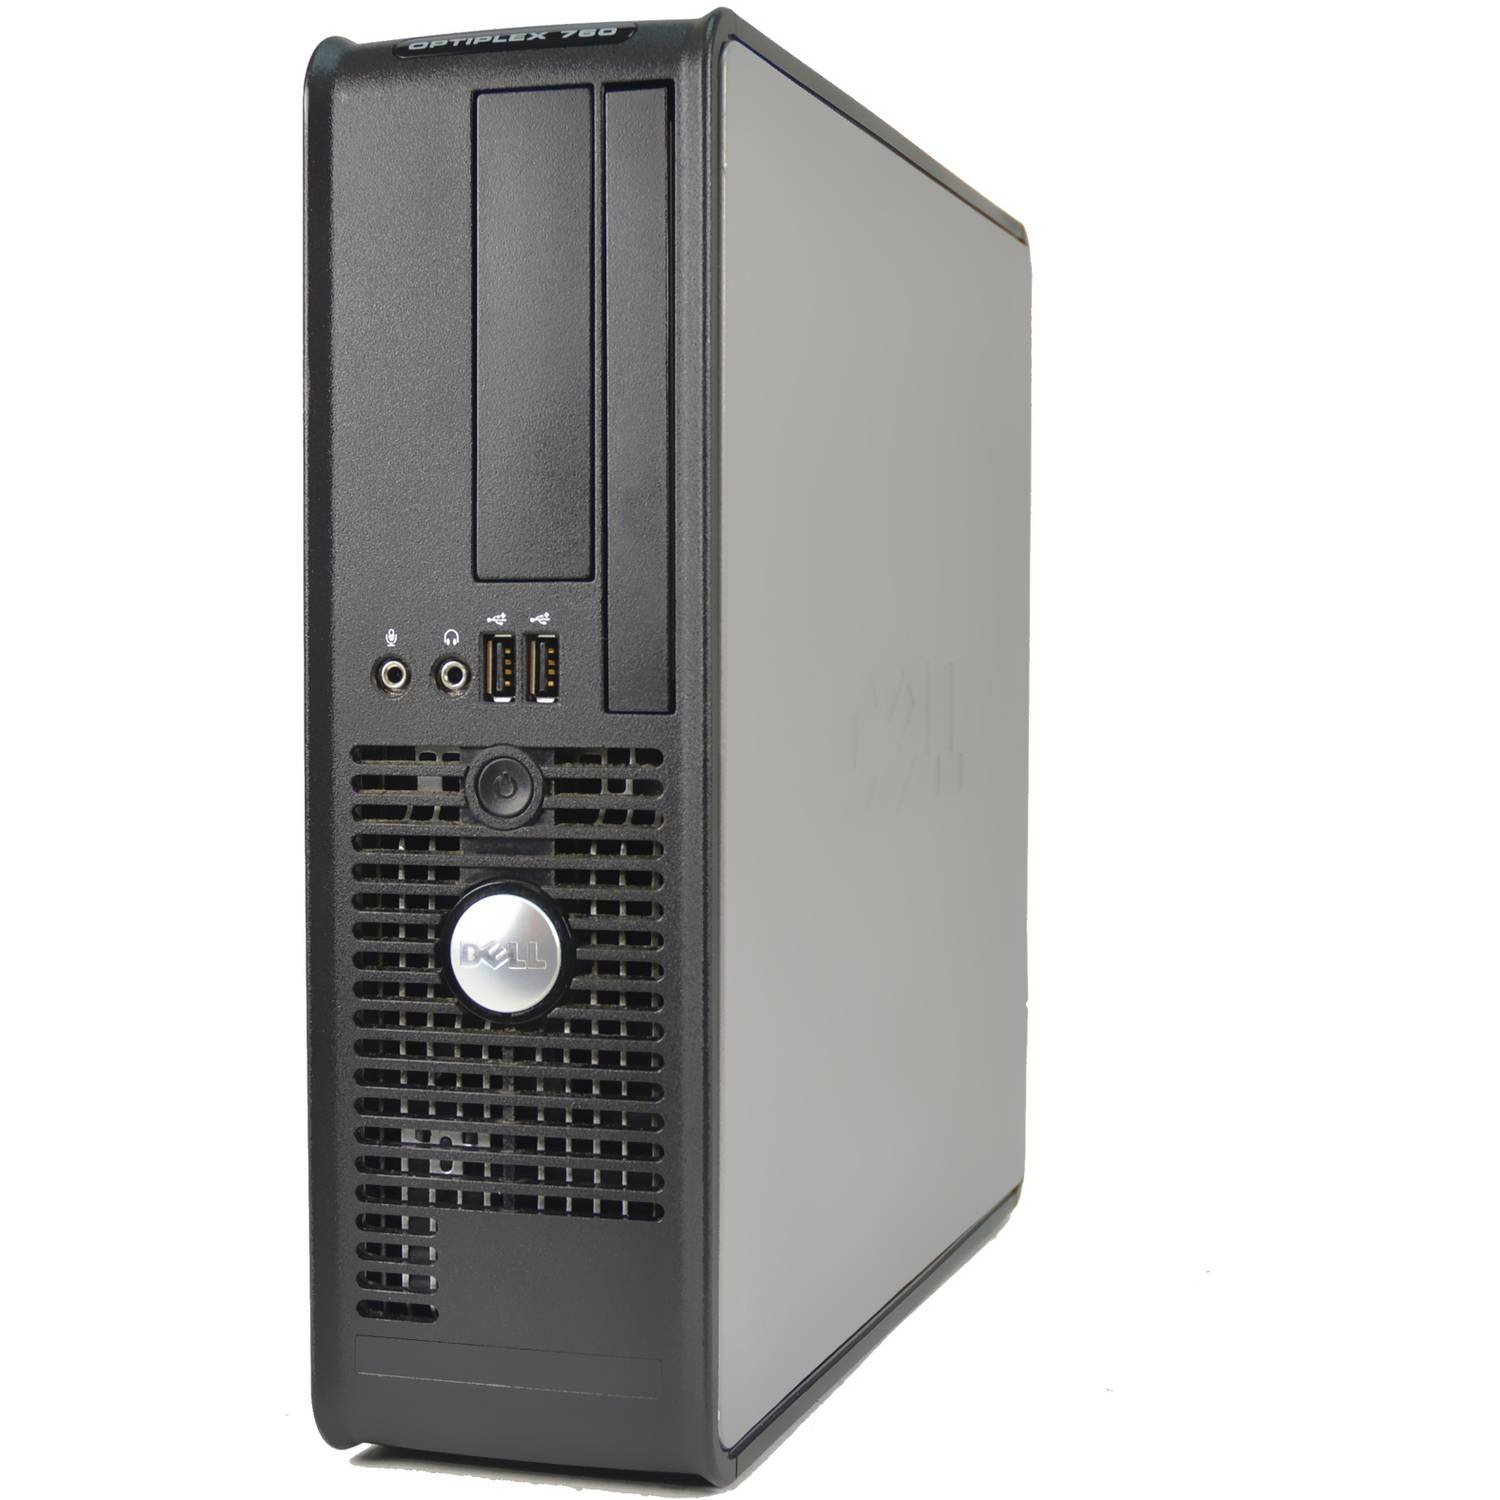 Restored Dell Black 760 Desktop PC with Intel Core 2 Duo Prcessor, 4GB Memory, 1TB Hard Drive and Windows 10 Pro (Monitor Not Included) (Refurbished) - image 1 of 5